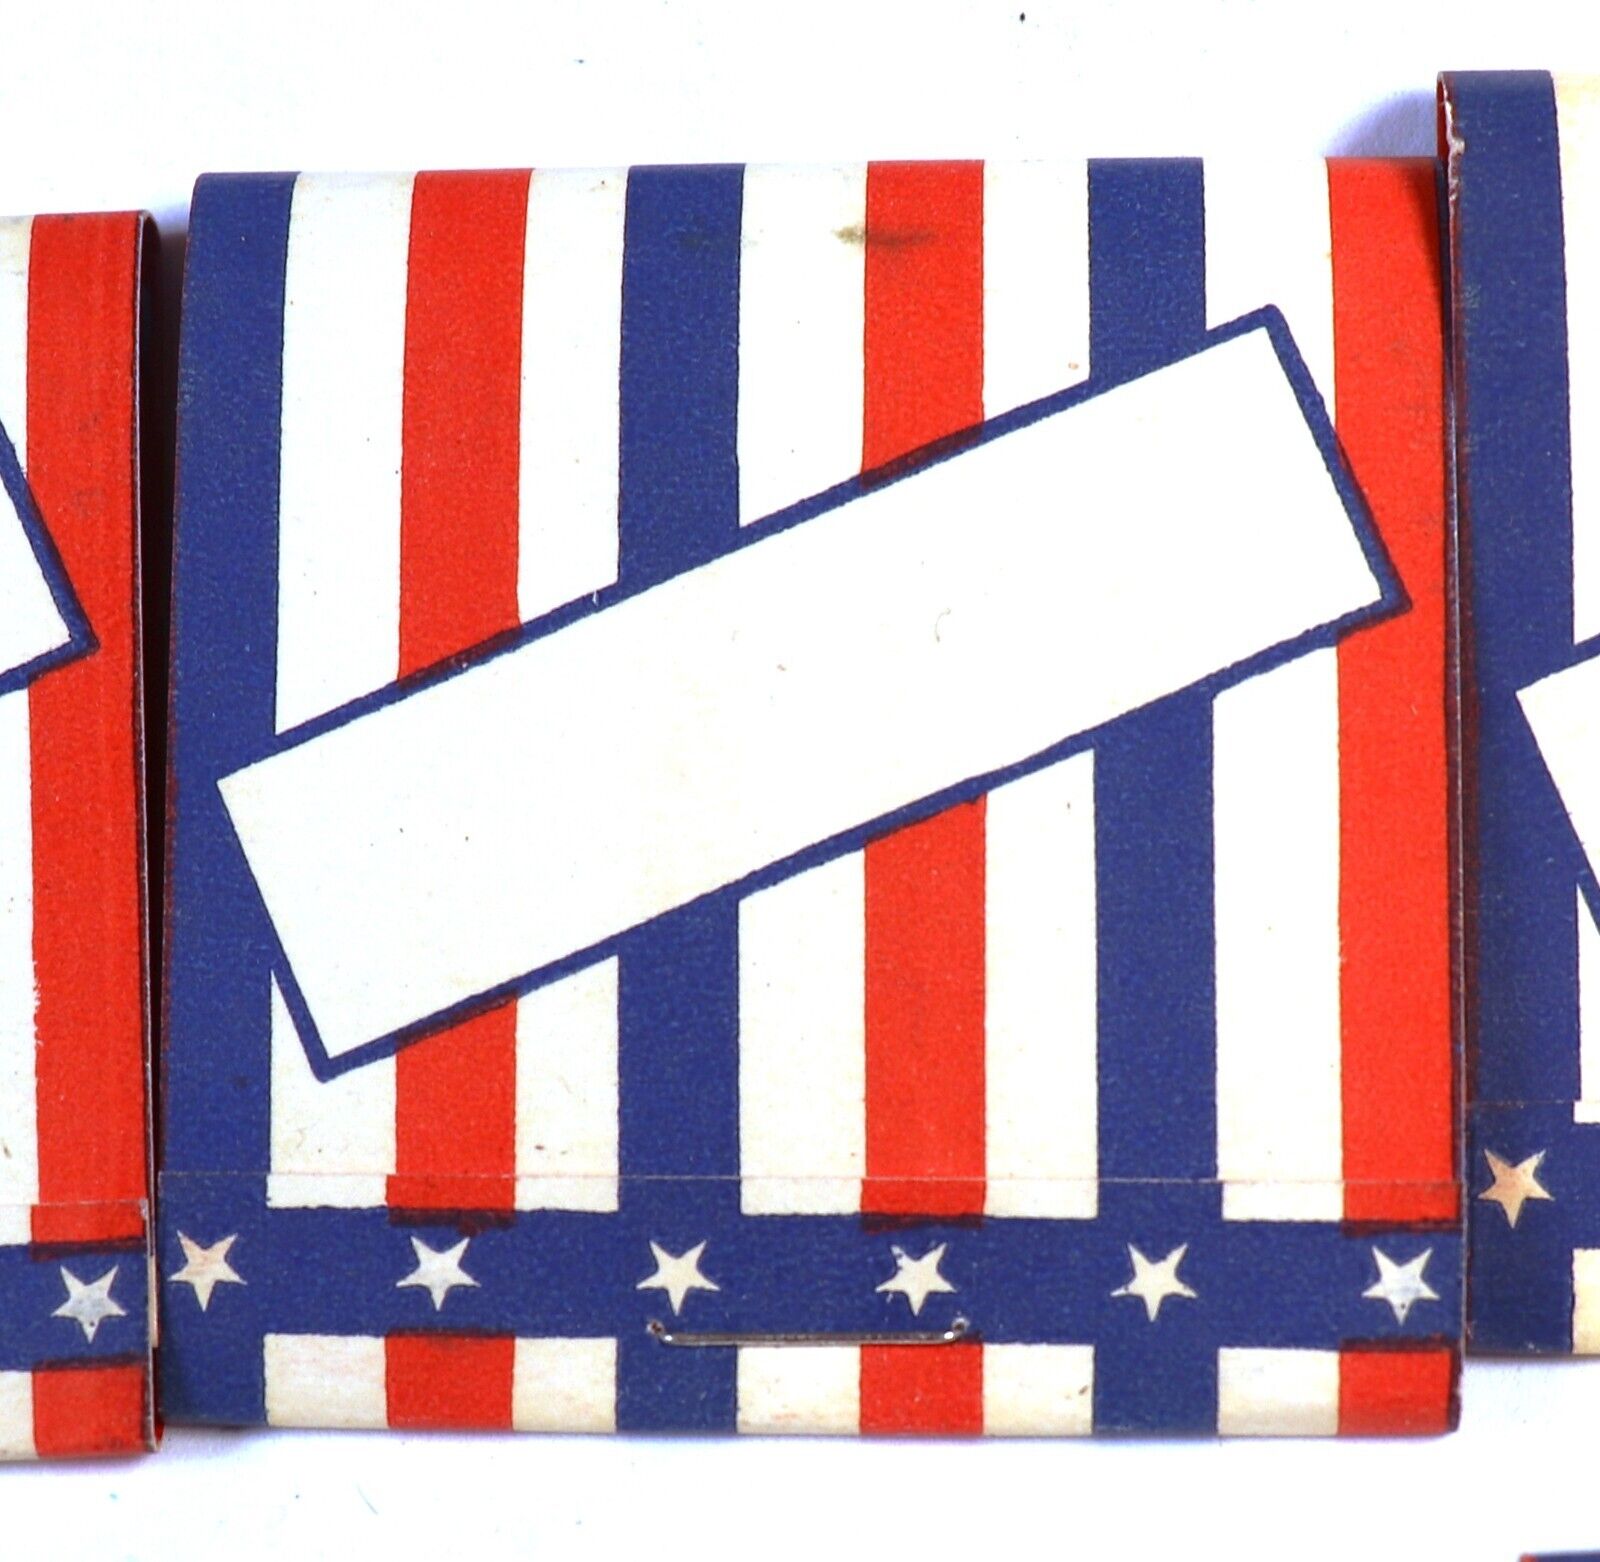 11 Vintage Patriotic Red White Blue Matchbooks With Blank Space for Personalize